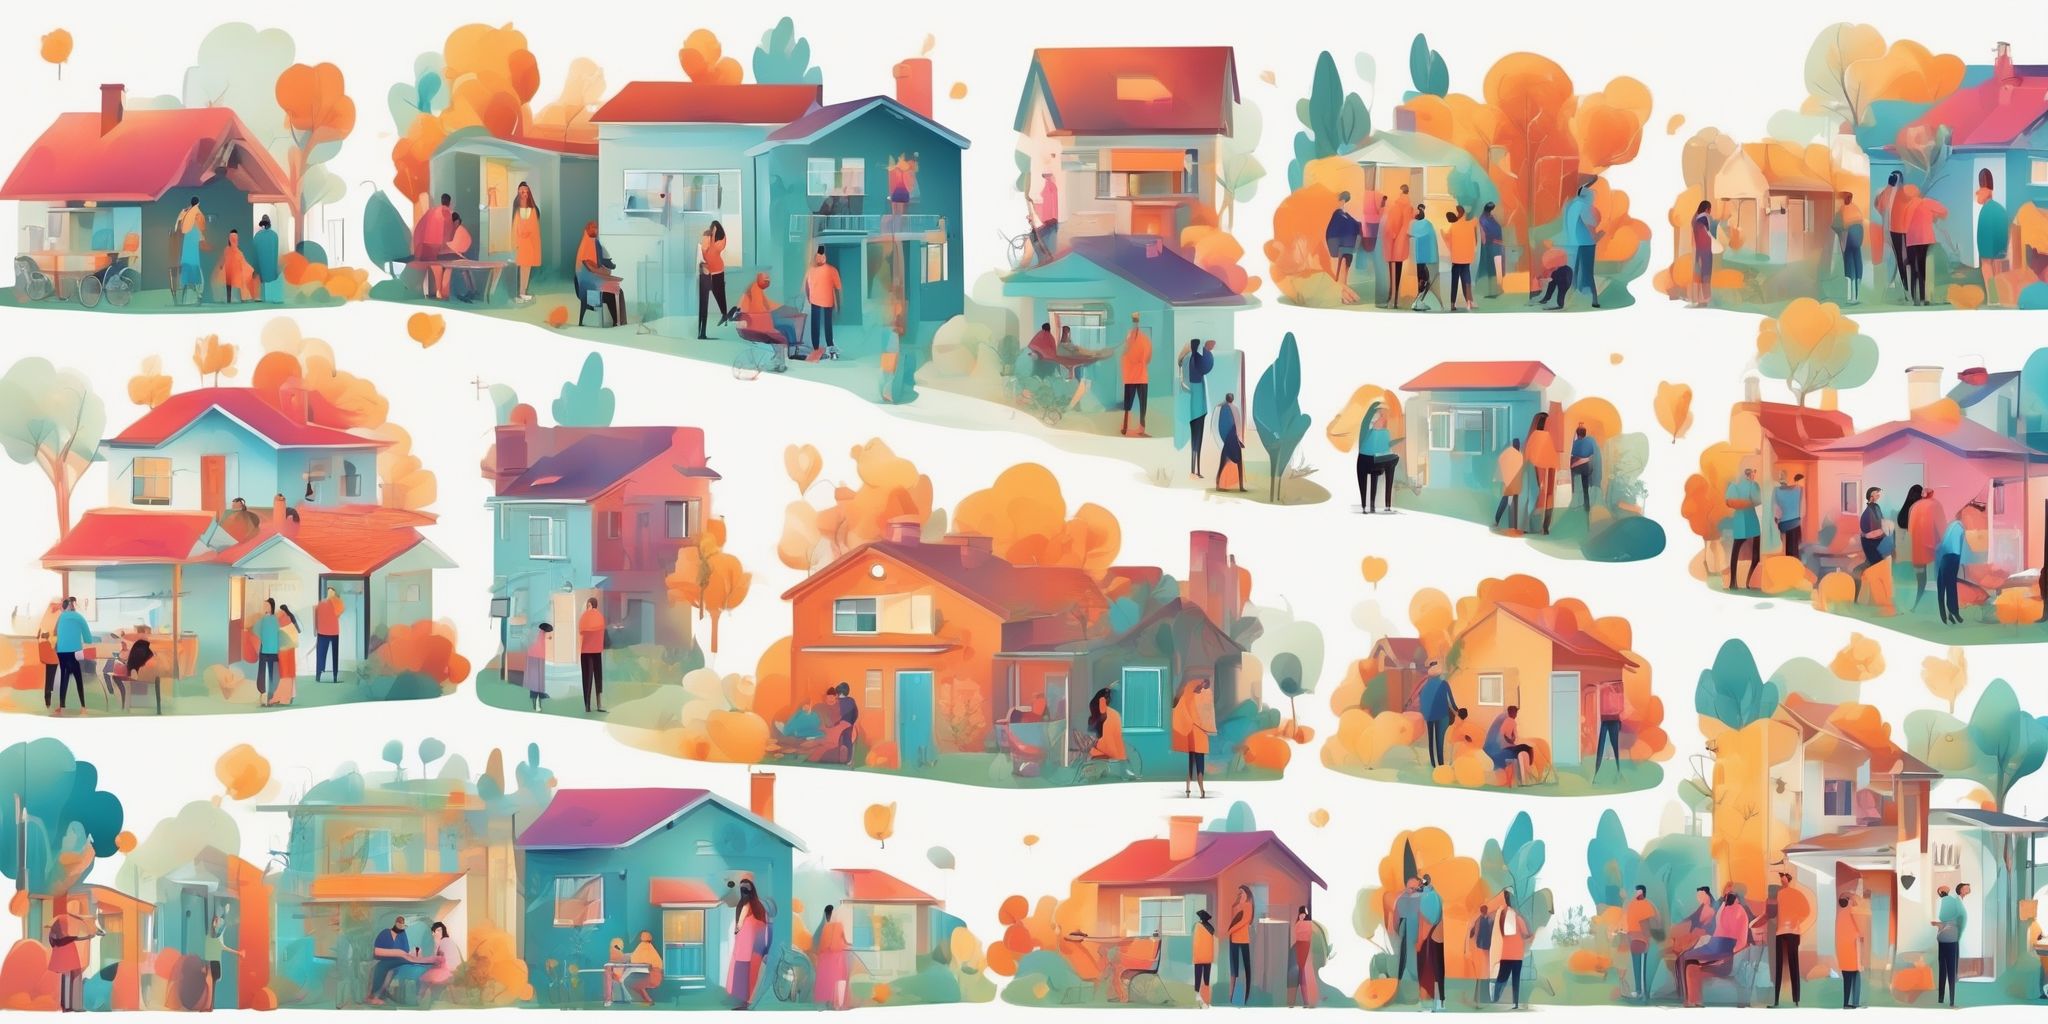 communities in illustration style with gradients and white background